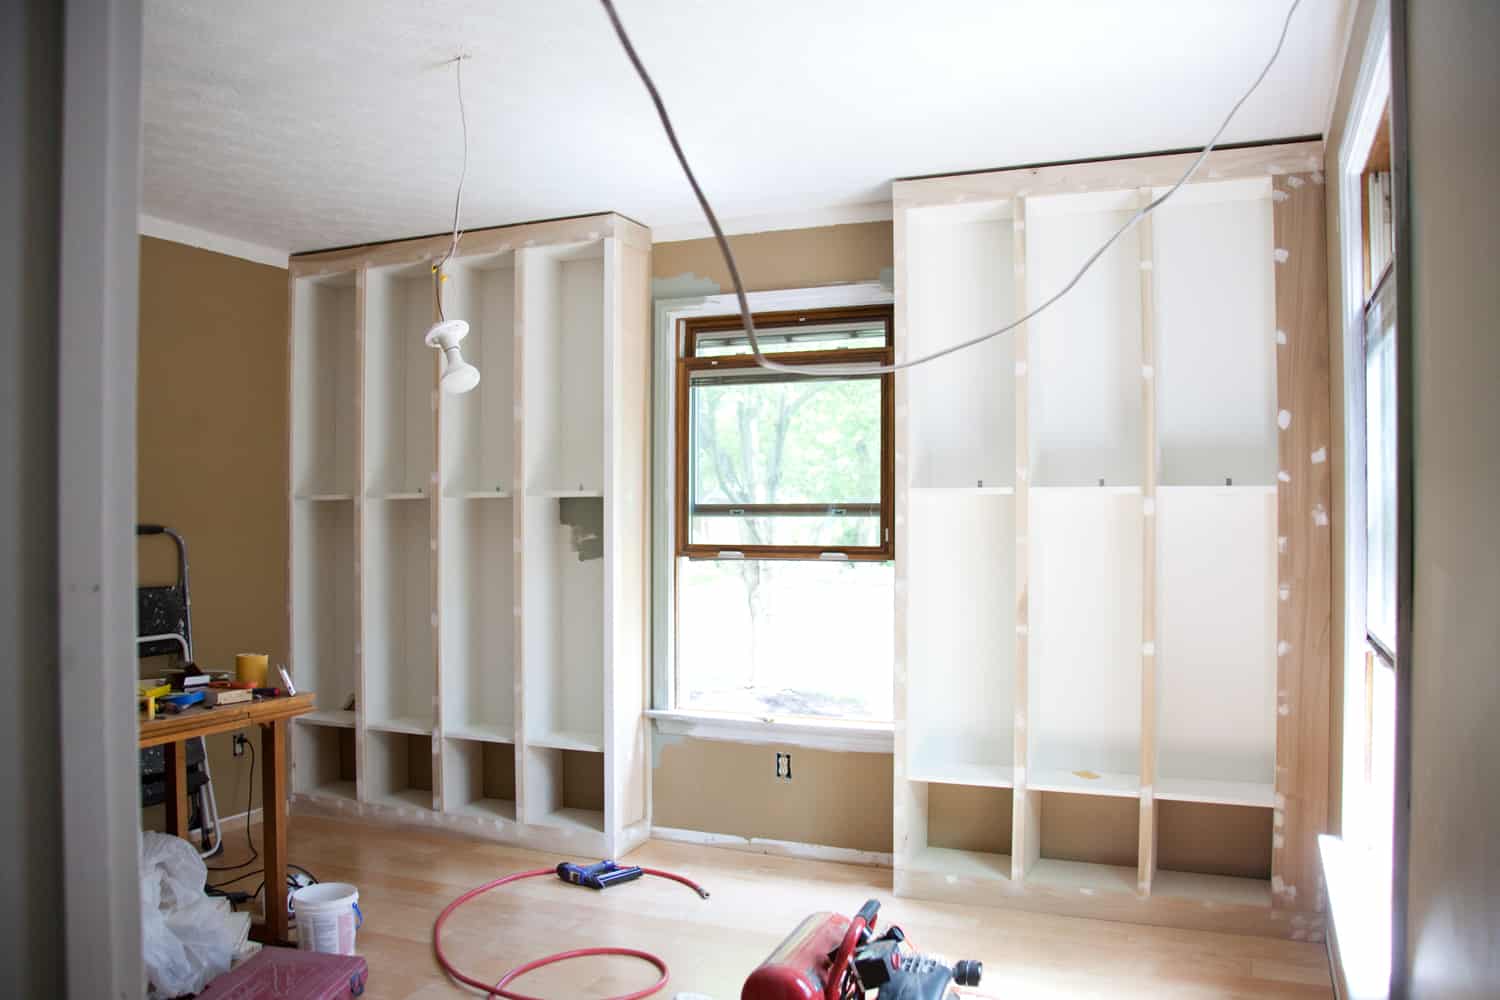 unfinished bookcases against wall with light fixture hanging down in front of it and powertools on floor